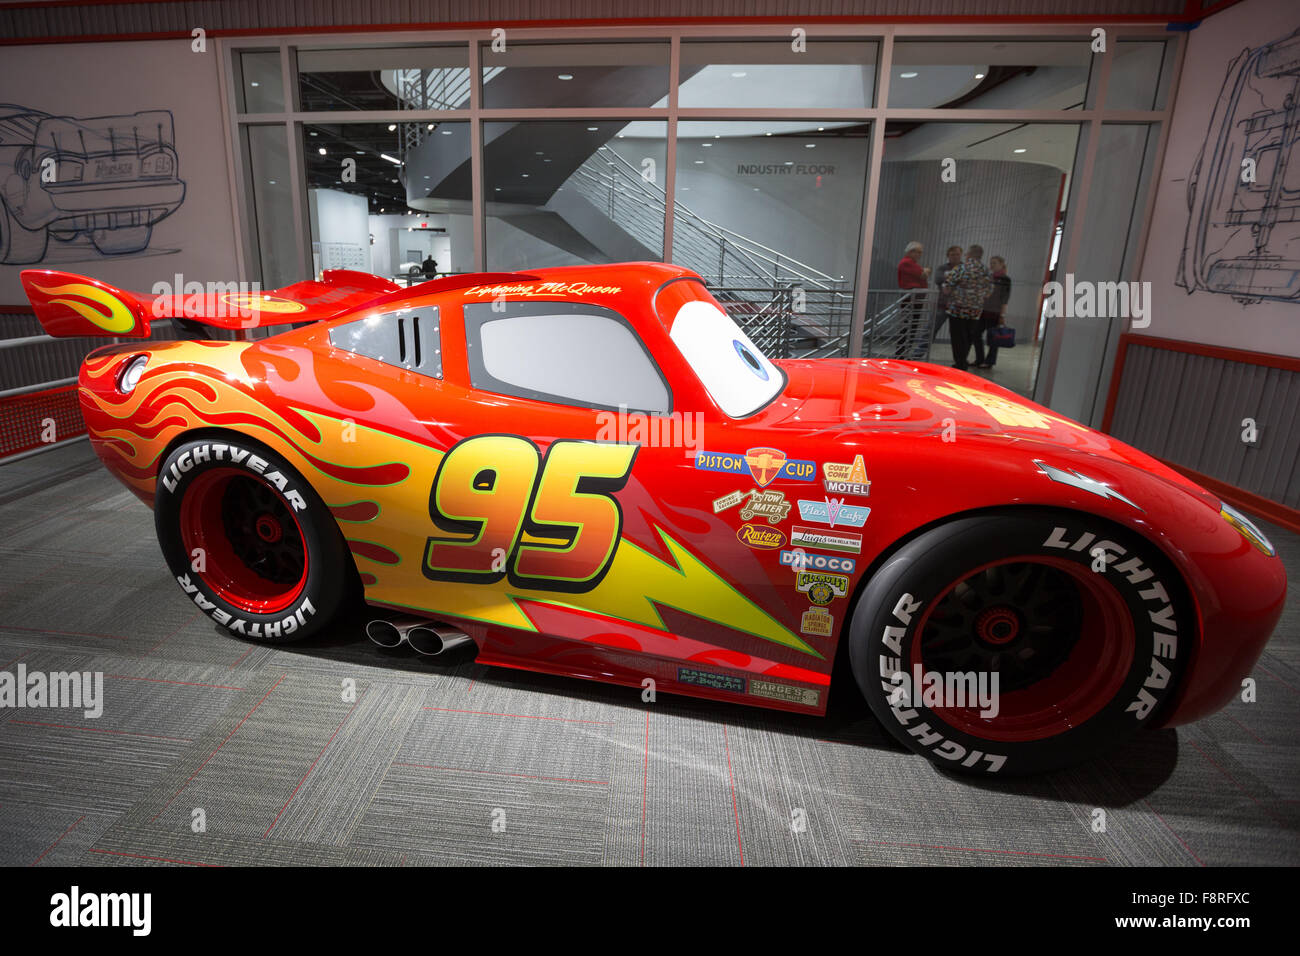 Detail of the Real Car from the Movie Cars, Lightning McQueen in Red Color  on the Race Track Editorial Photography - Image of michigan, lightning:  267624612